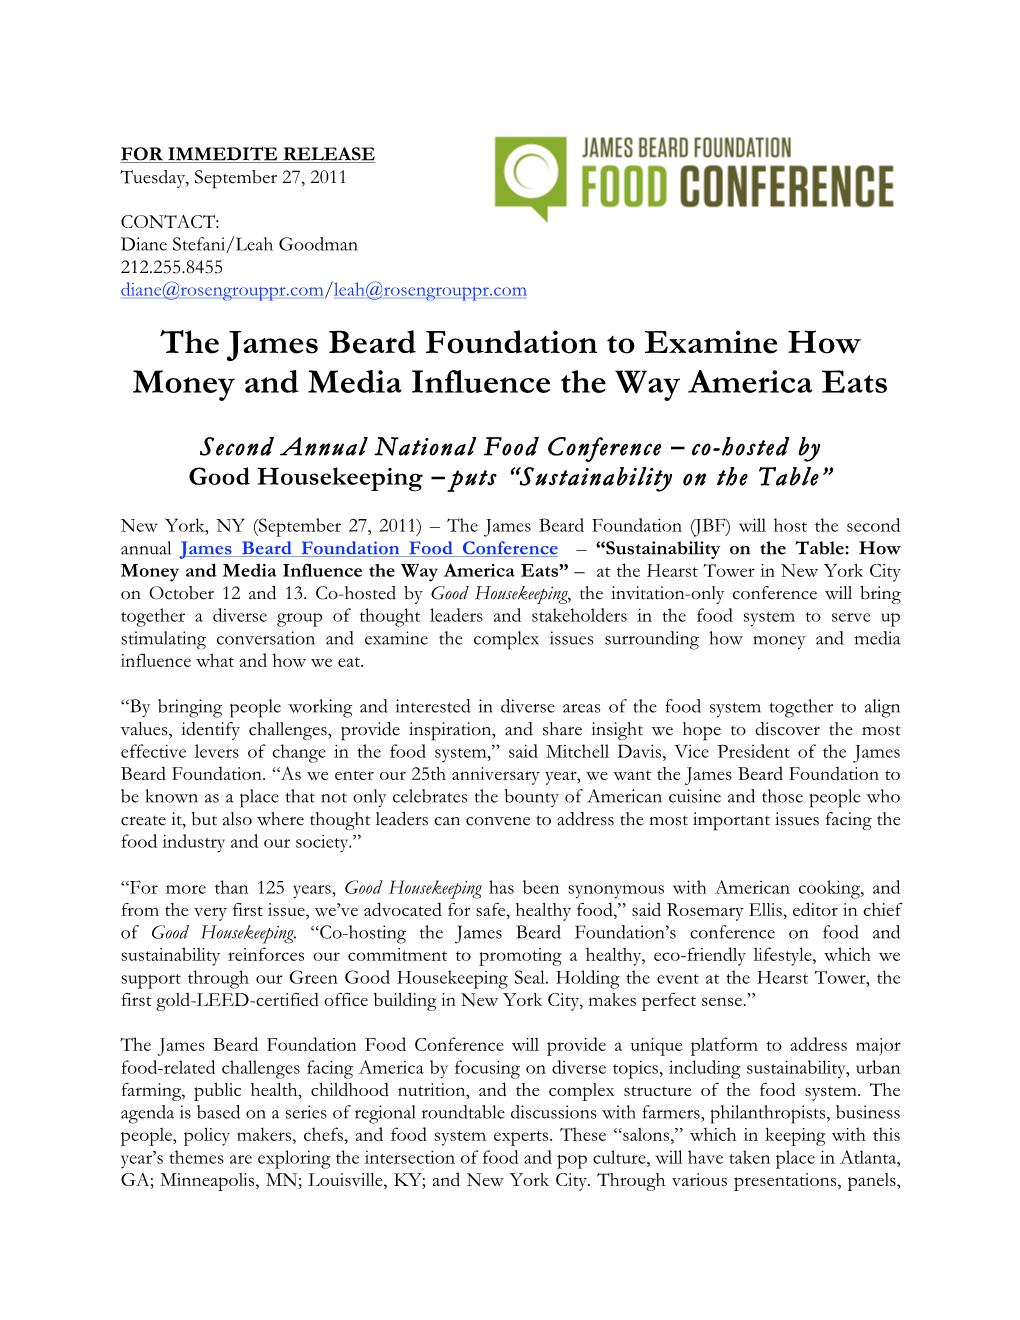 2011 Food Conference Release FINAL 9.27.11-2